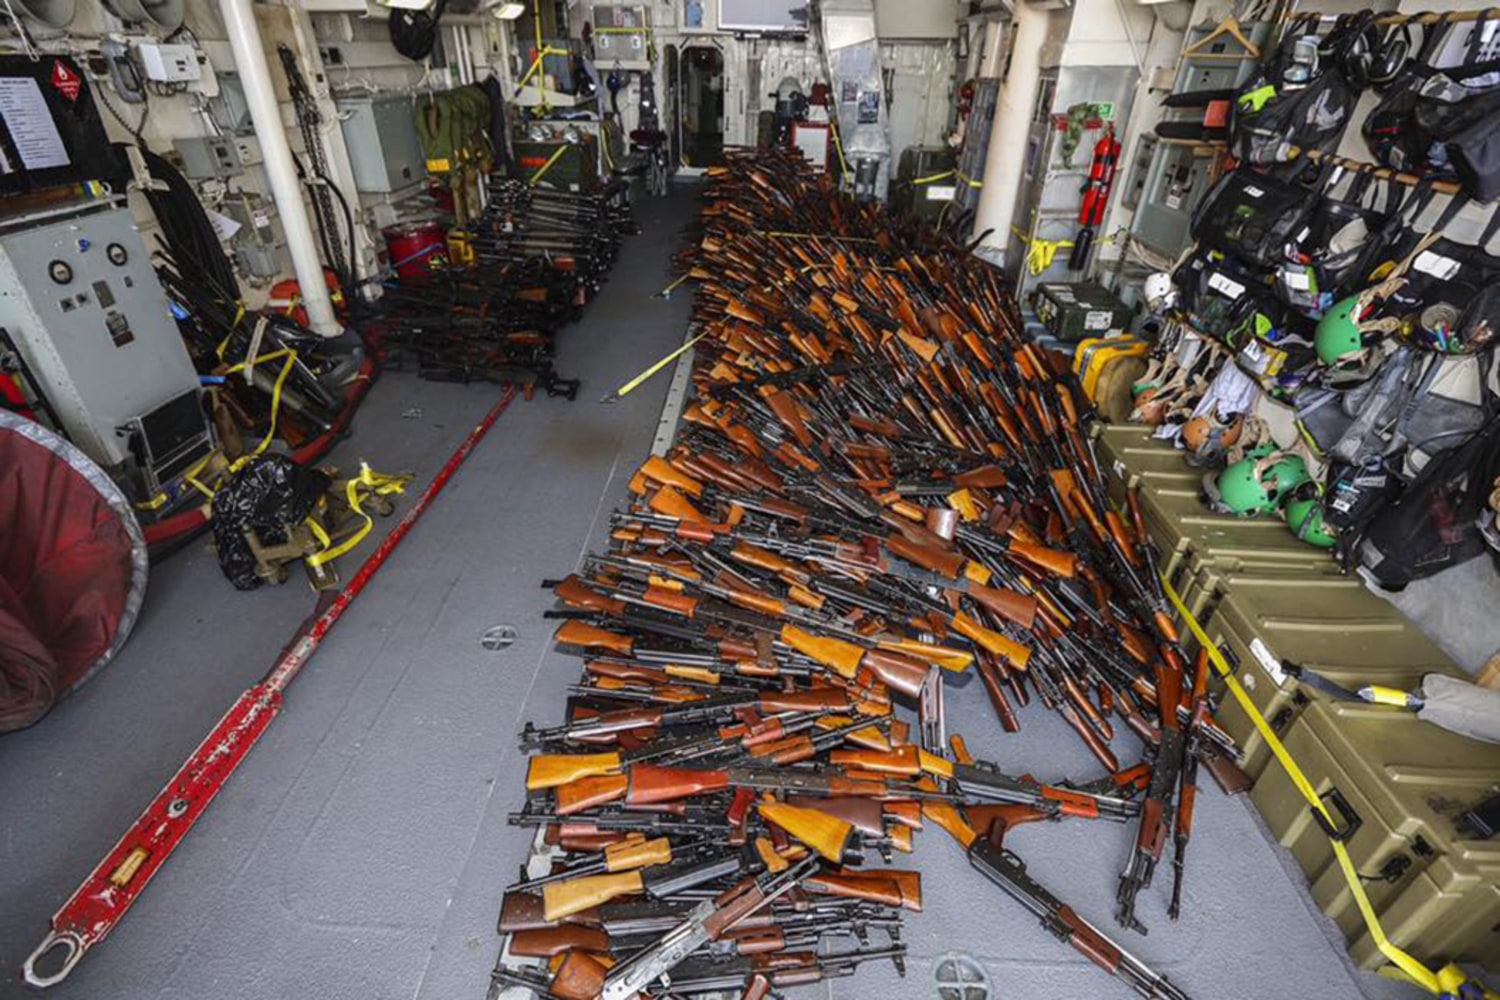 Australia Navy Finds 2,000 Weapons on Somalia-Bound Fishing Dhow